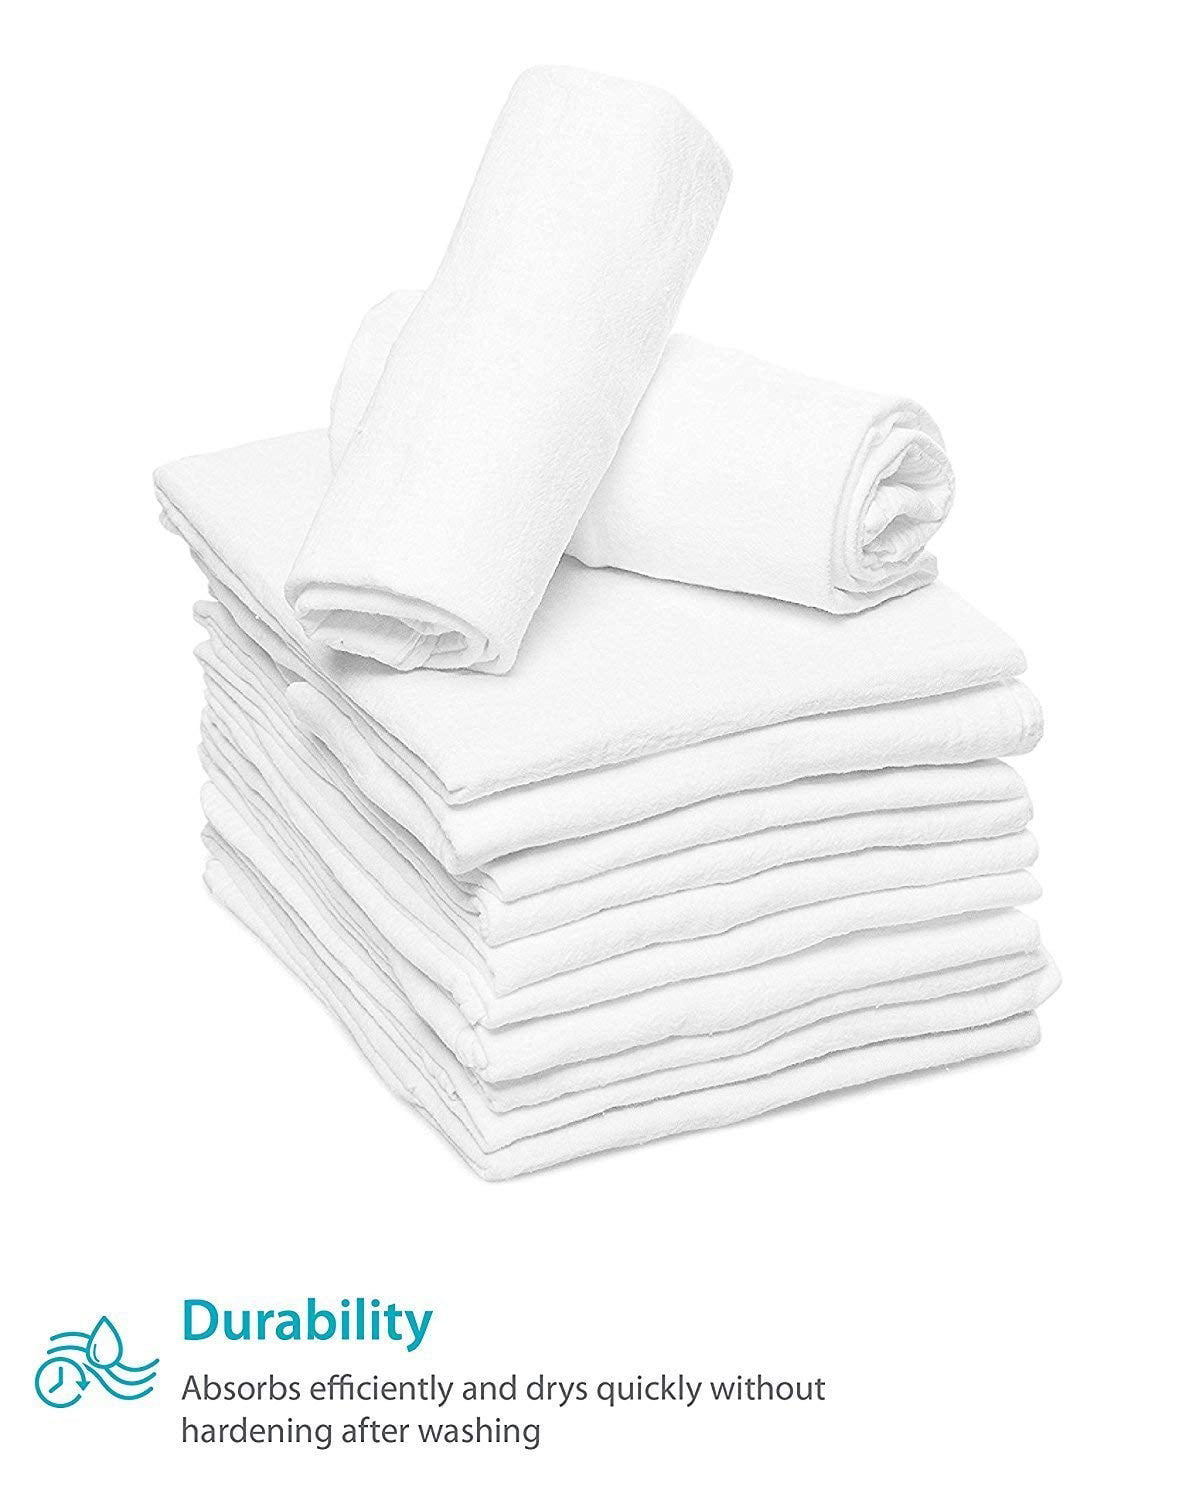 Magellan Hand Towels, White, Soft Ring Spun Cotton, 16x30 in., Buy a Pack  of 12 or Buy a Case, 12 Pack - Kroger